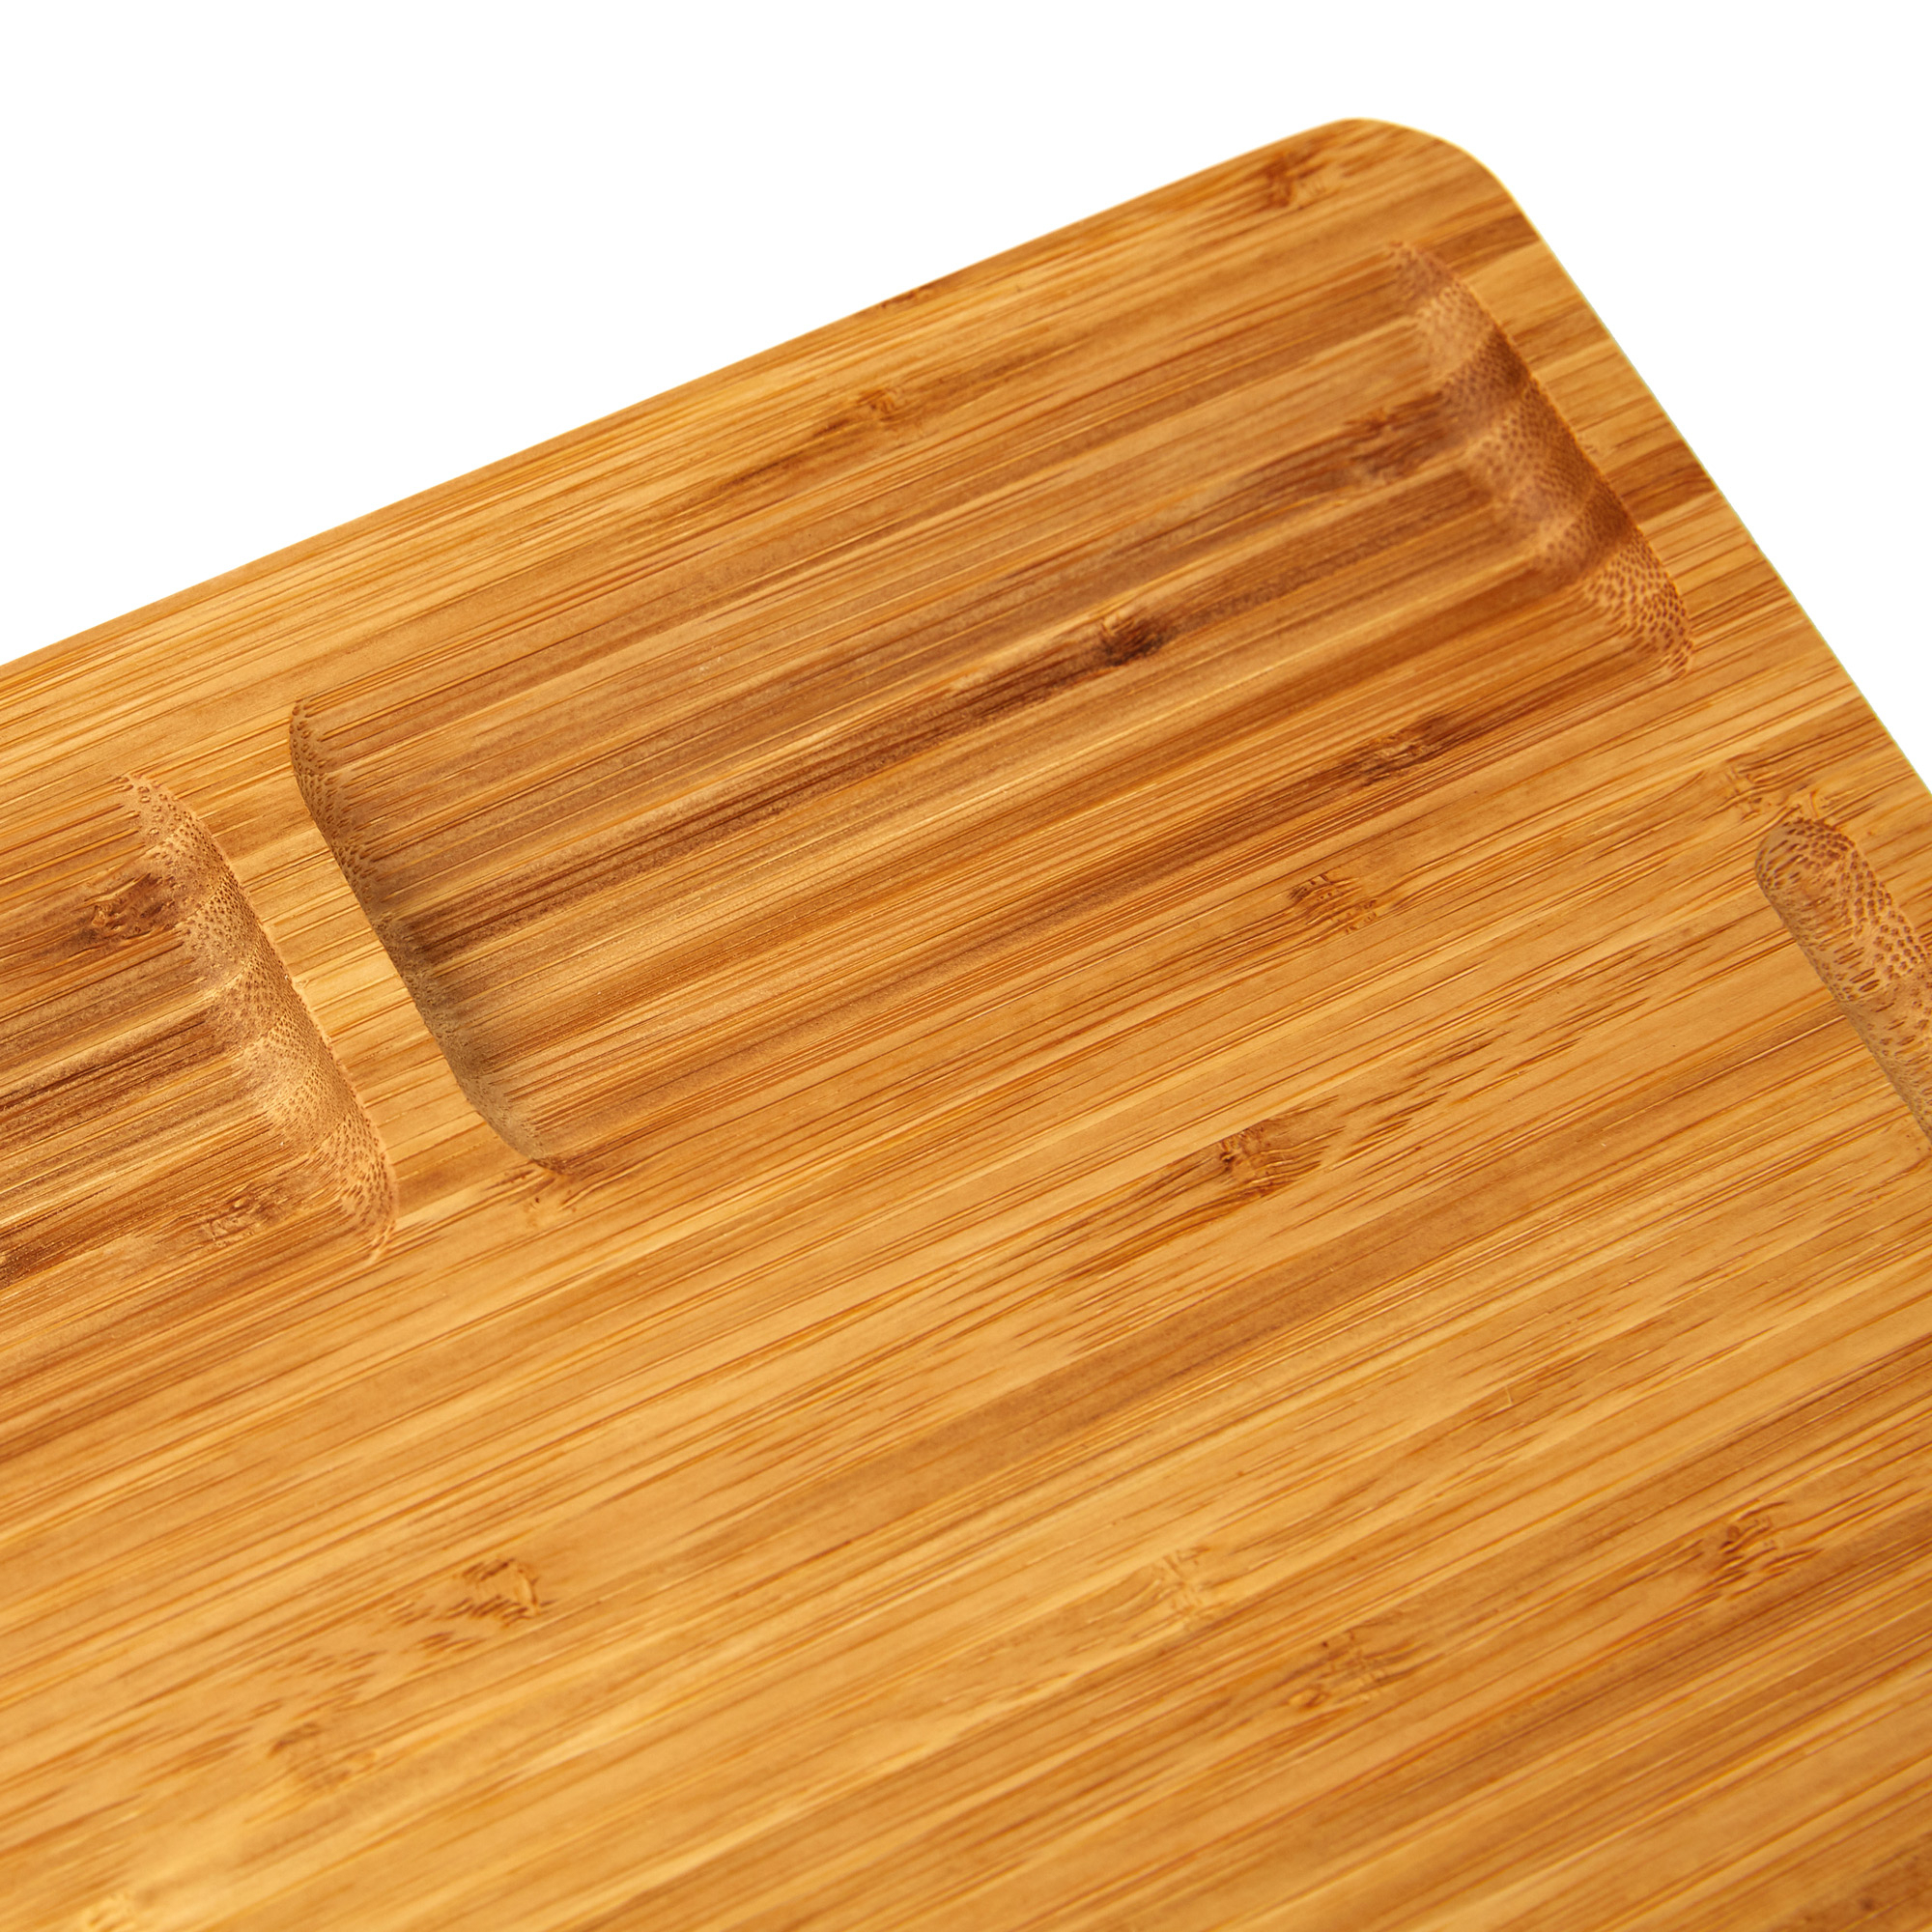 Vaiyer Bamboo Wood Cutting Board For Kitchen, With 3 Built-in Compartments And Juice Grooves, Butcher Block, Heavy Duty Cutting Board